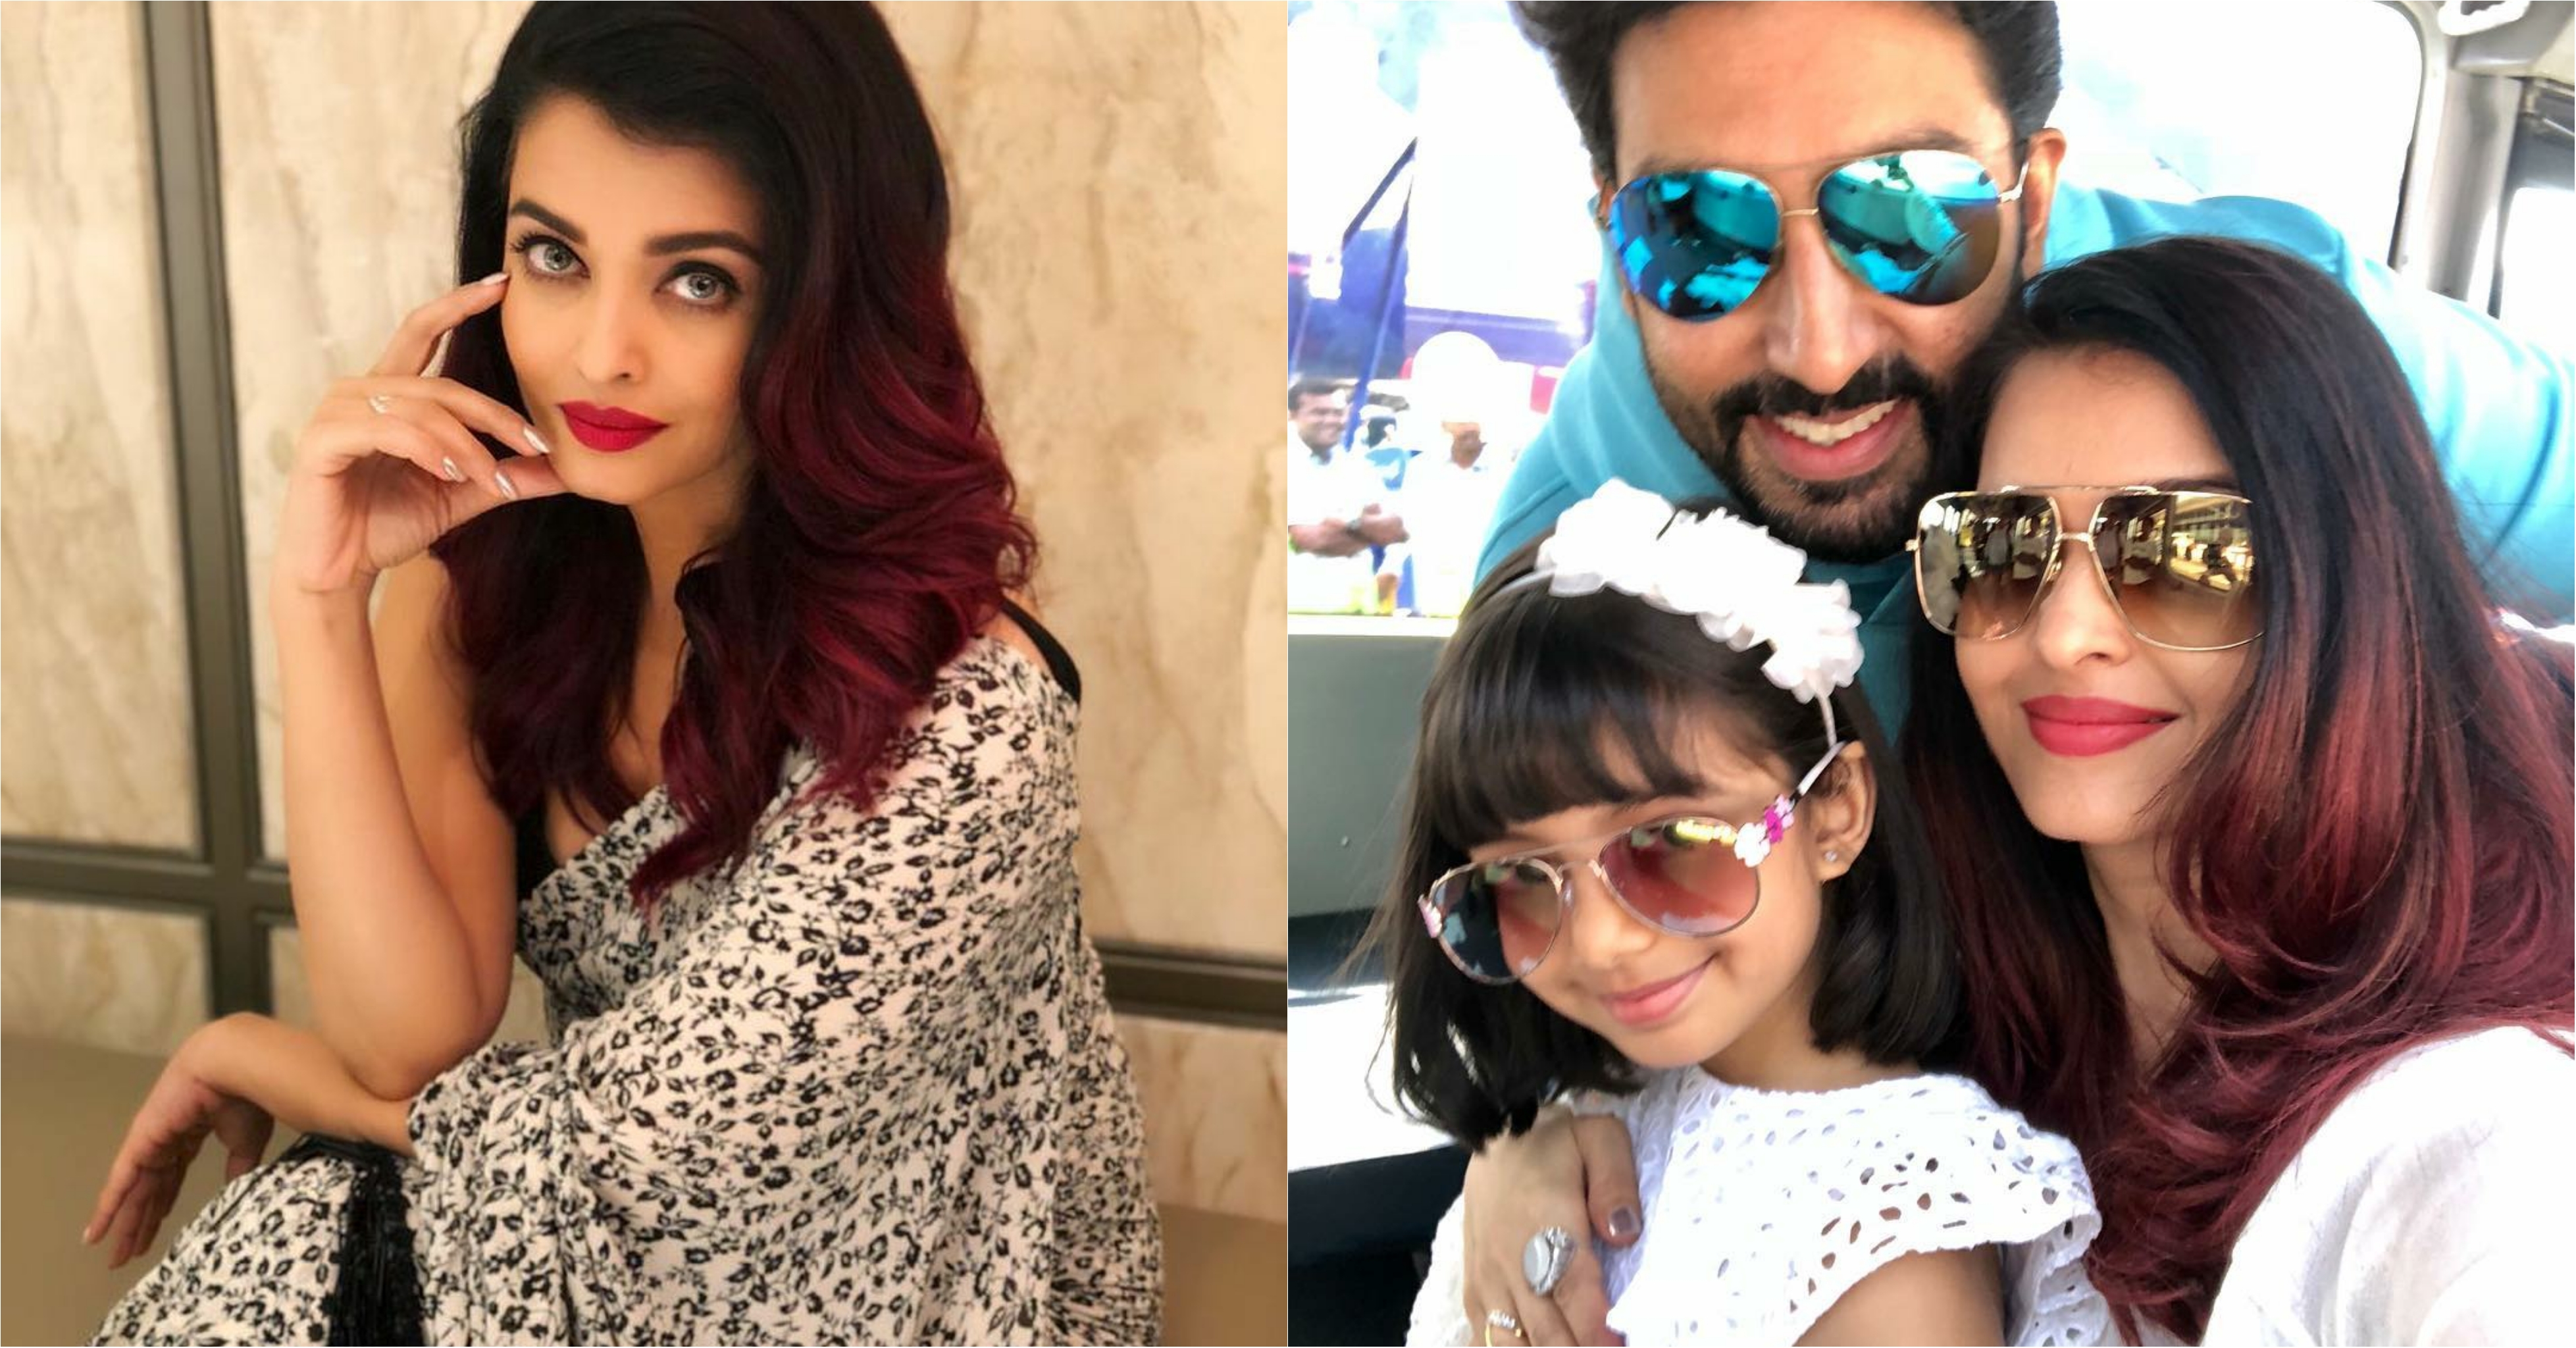 Happy Birthday Aishwarya Rai Bachchan: Here Are Some Glimpses From Her Birthday Party